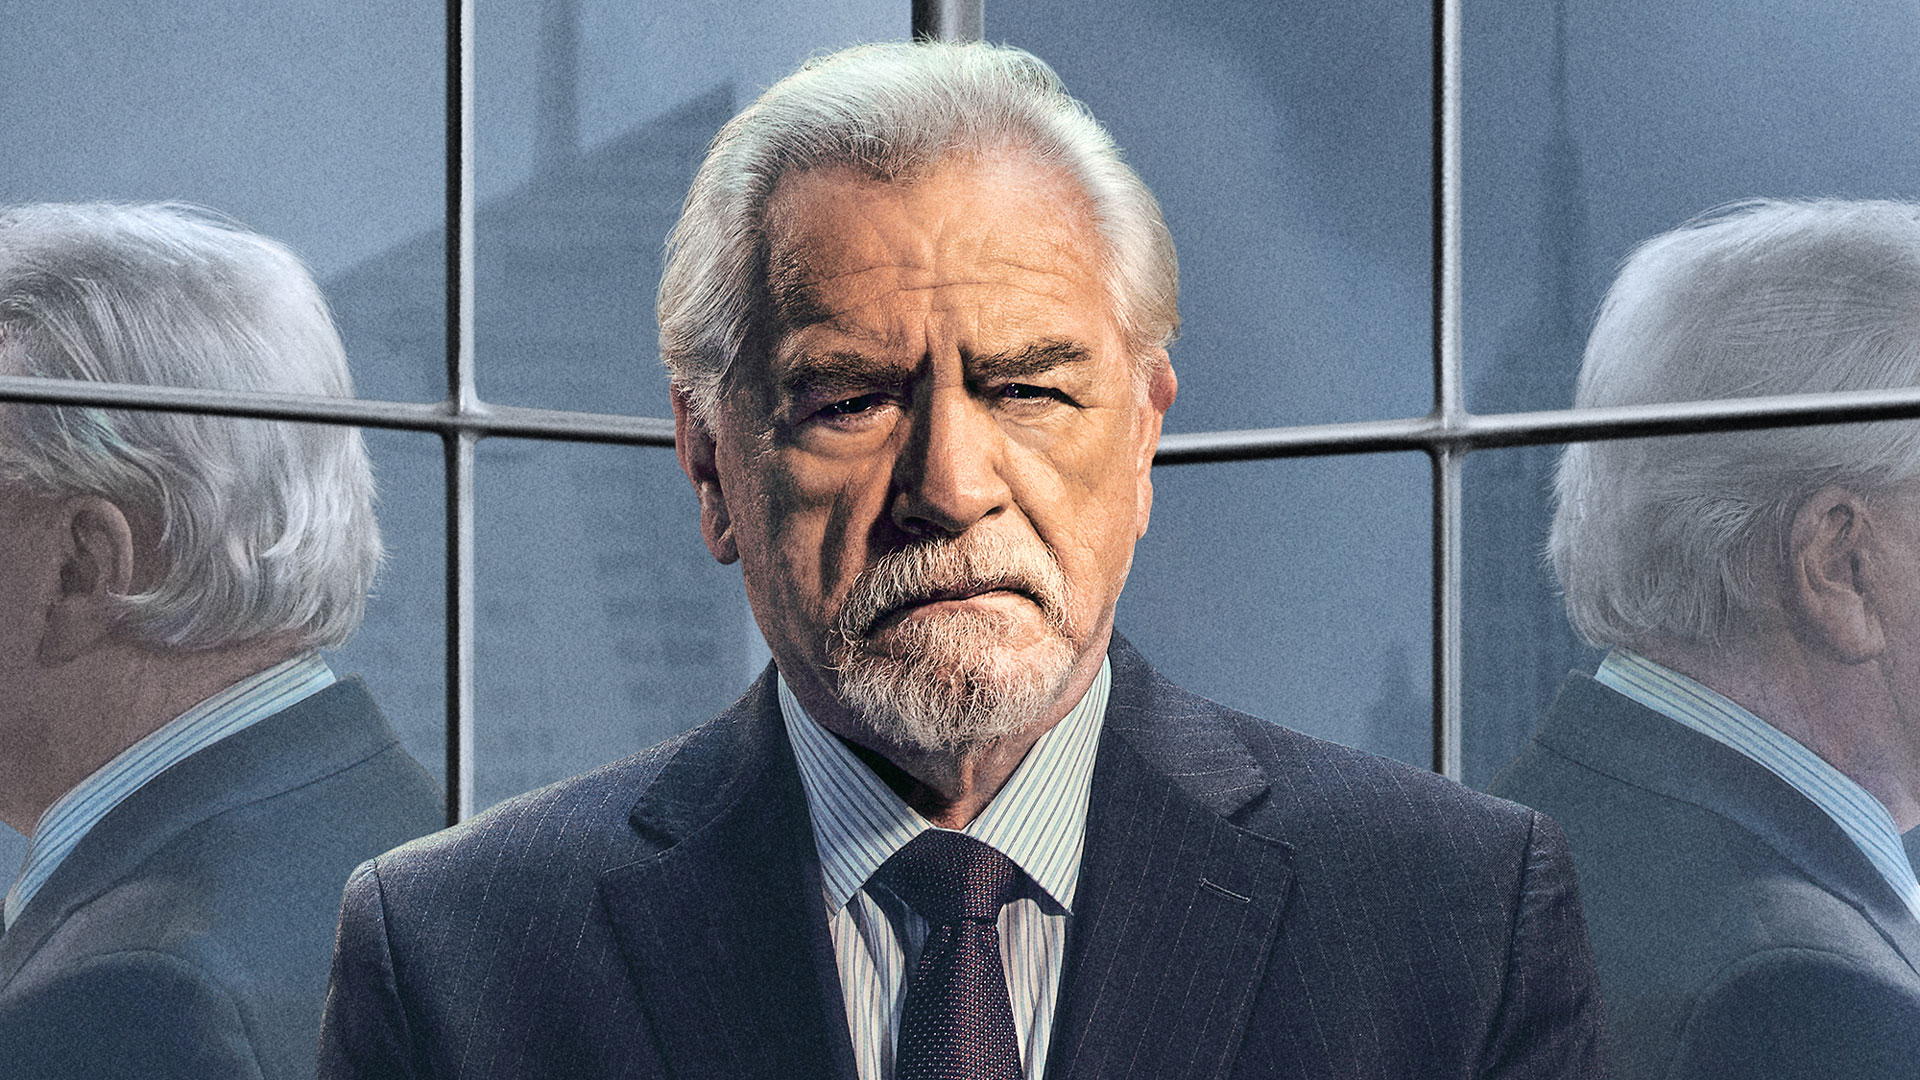 Brian Cox as Succession patriarch Logan Roy, whose death shows different responses to grief